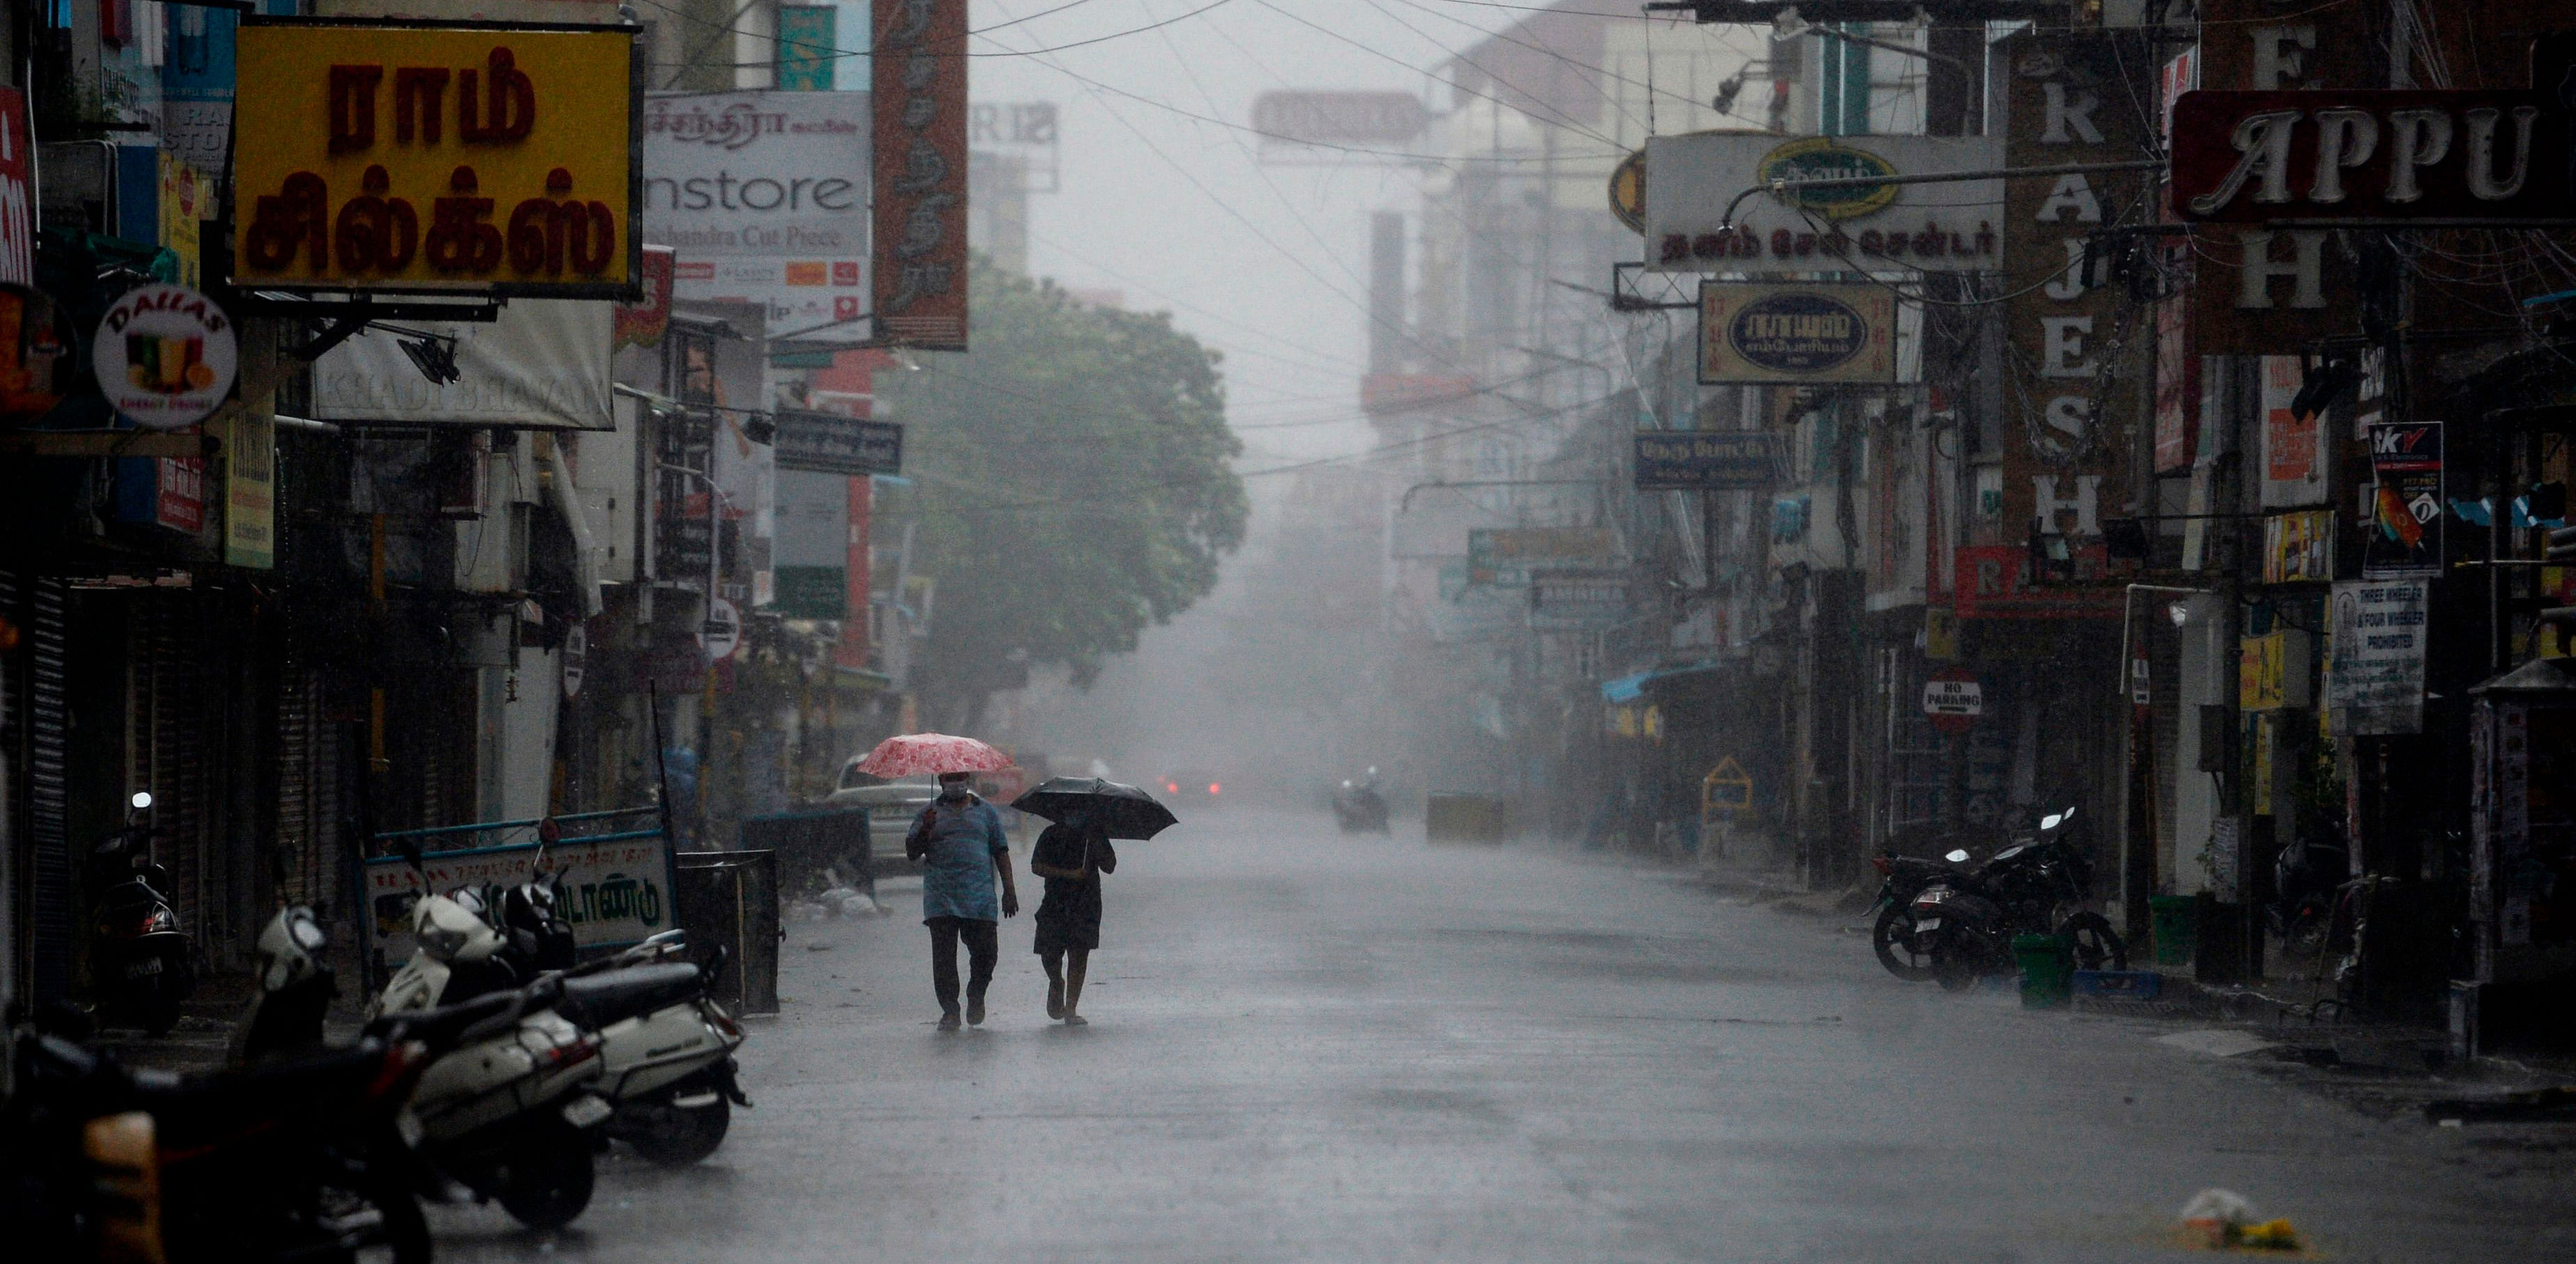 Residents shelter from heavy rain under umbrellas while walking along a deserted road as cyclone Nivar approaches. Credit: AFP